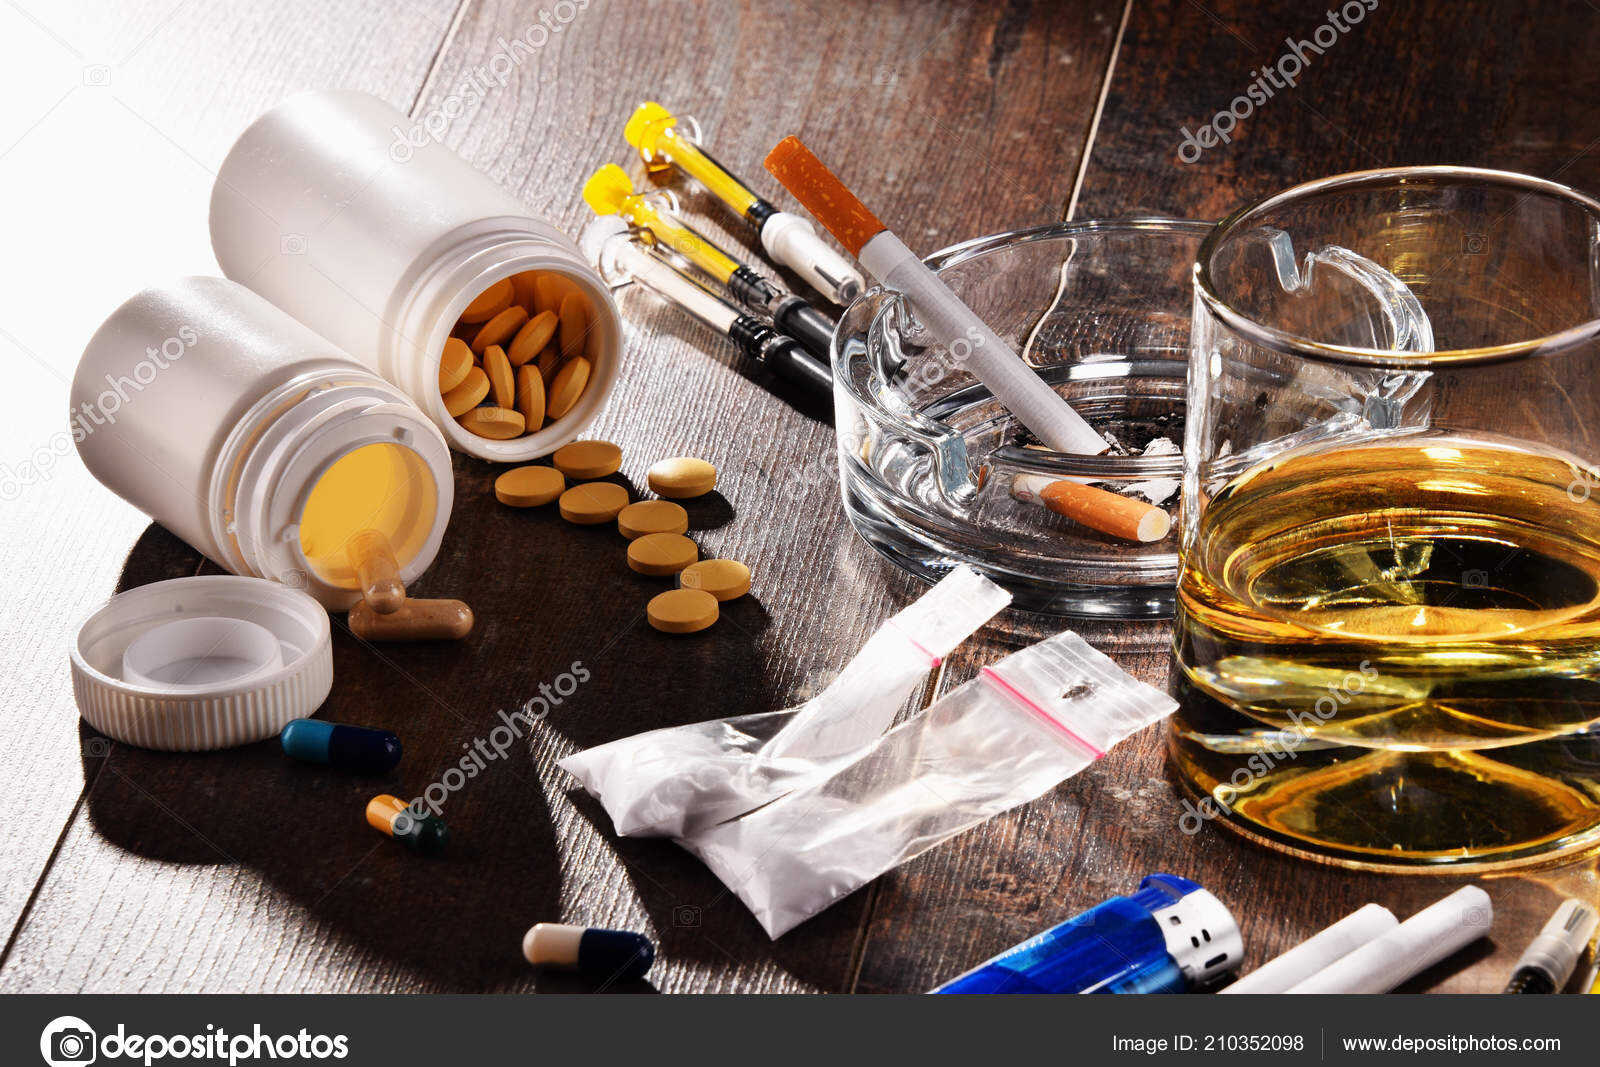 photo of various substances that can be abused